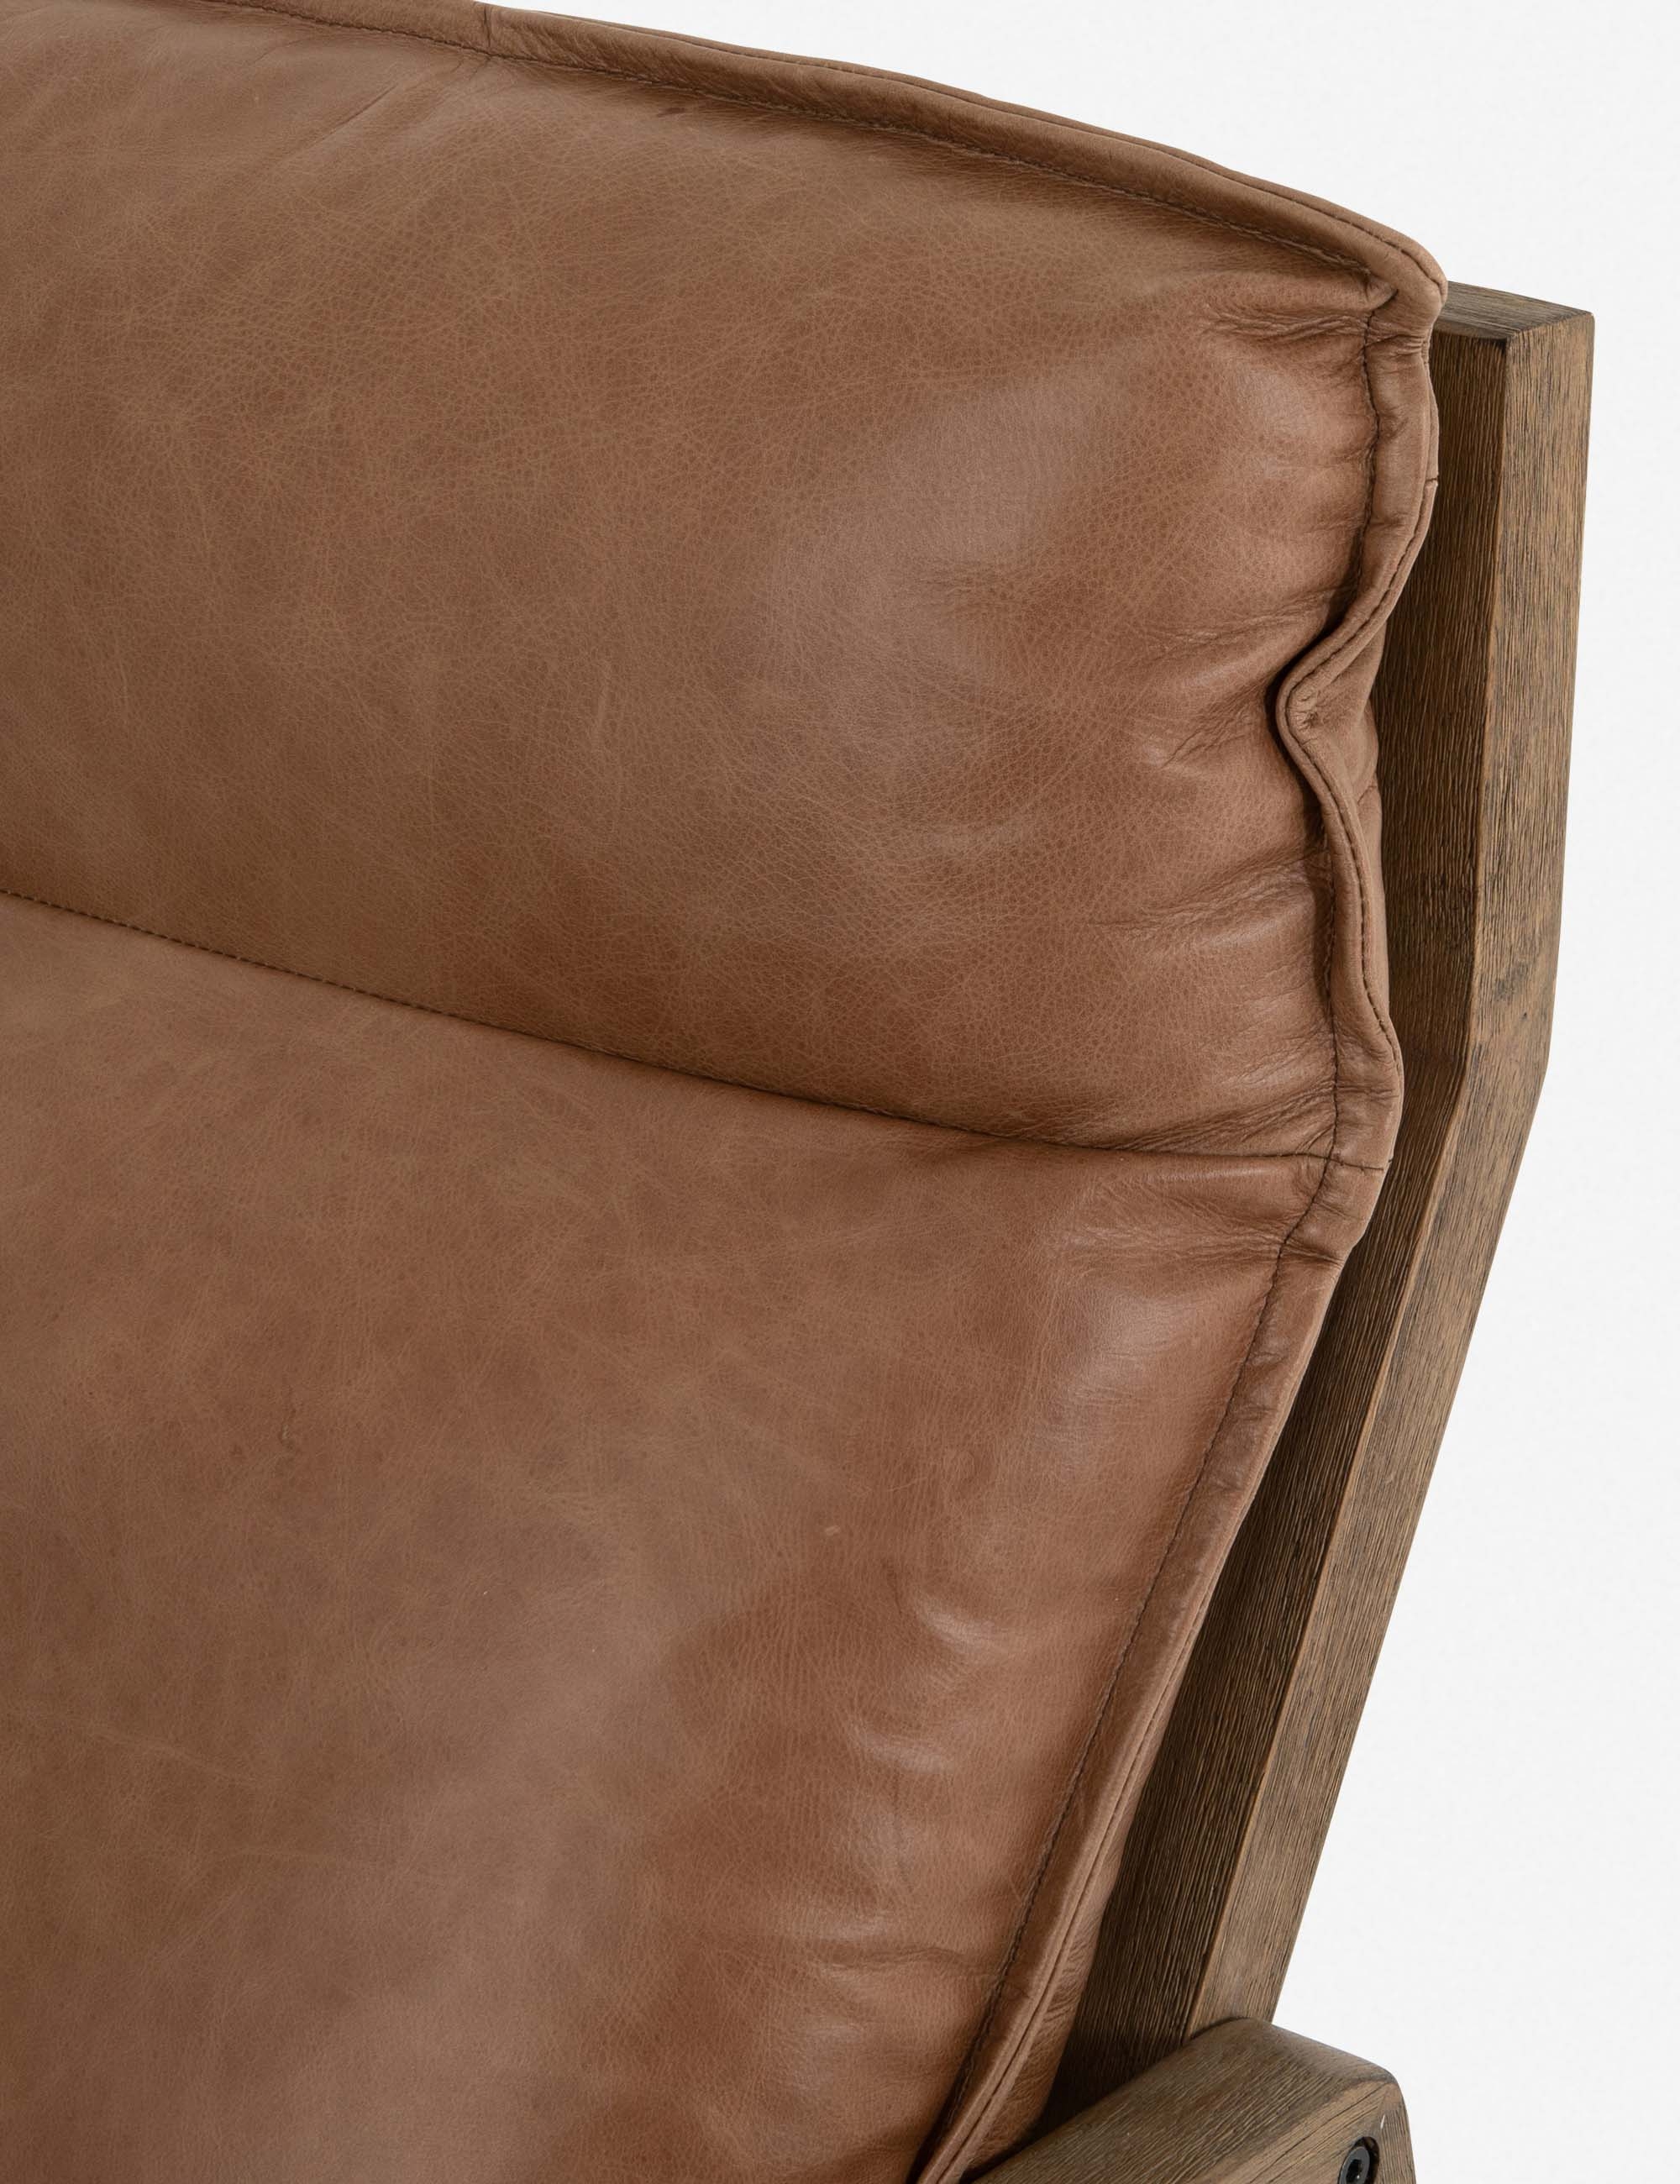 Rowena Leather Accent Chair - Image 6